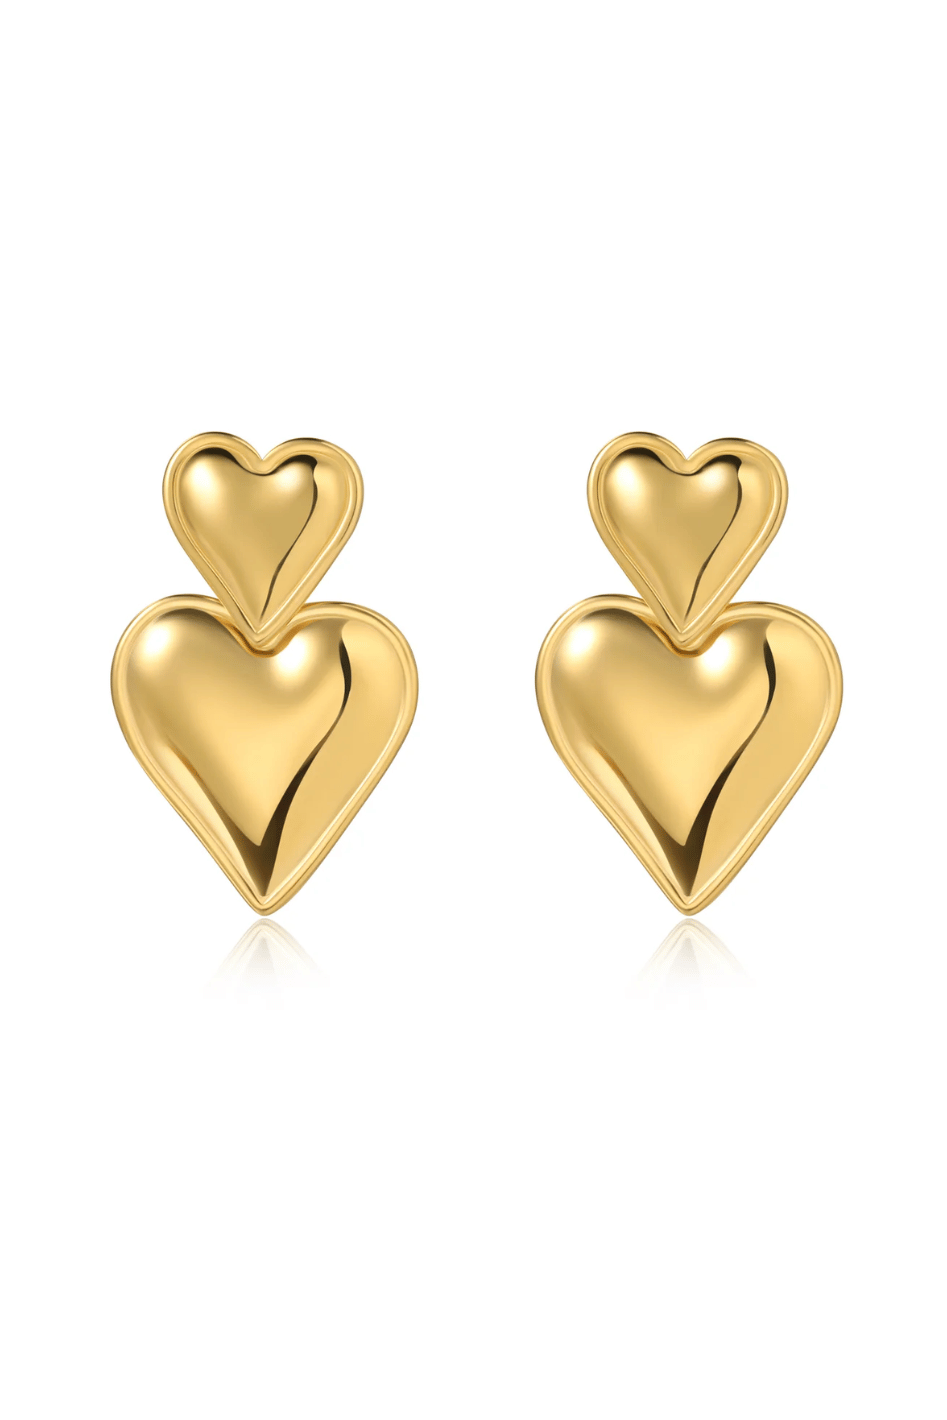 Brynn Heart Earring - Expressive Collective CO.